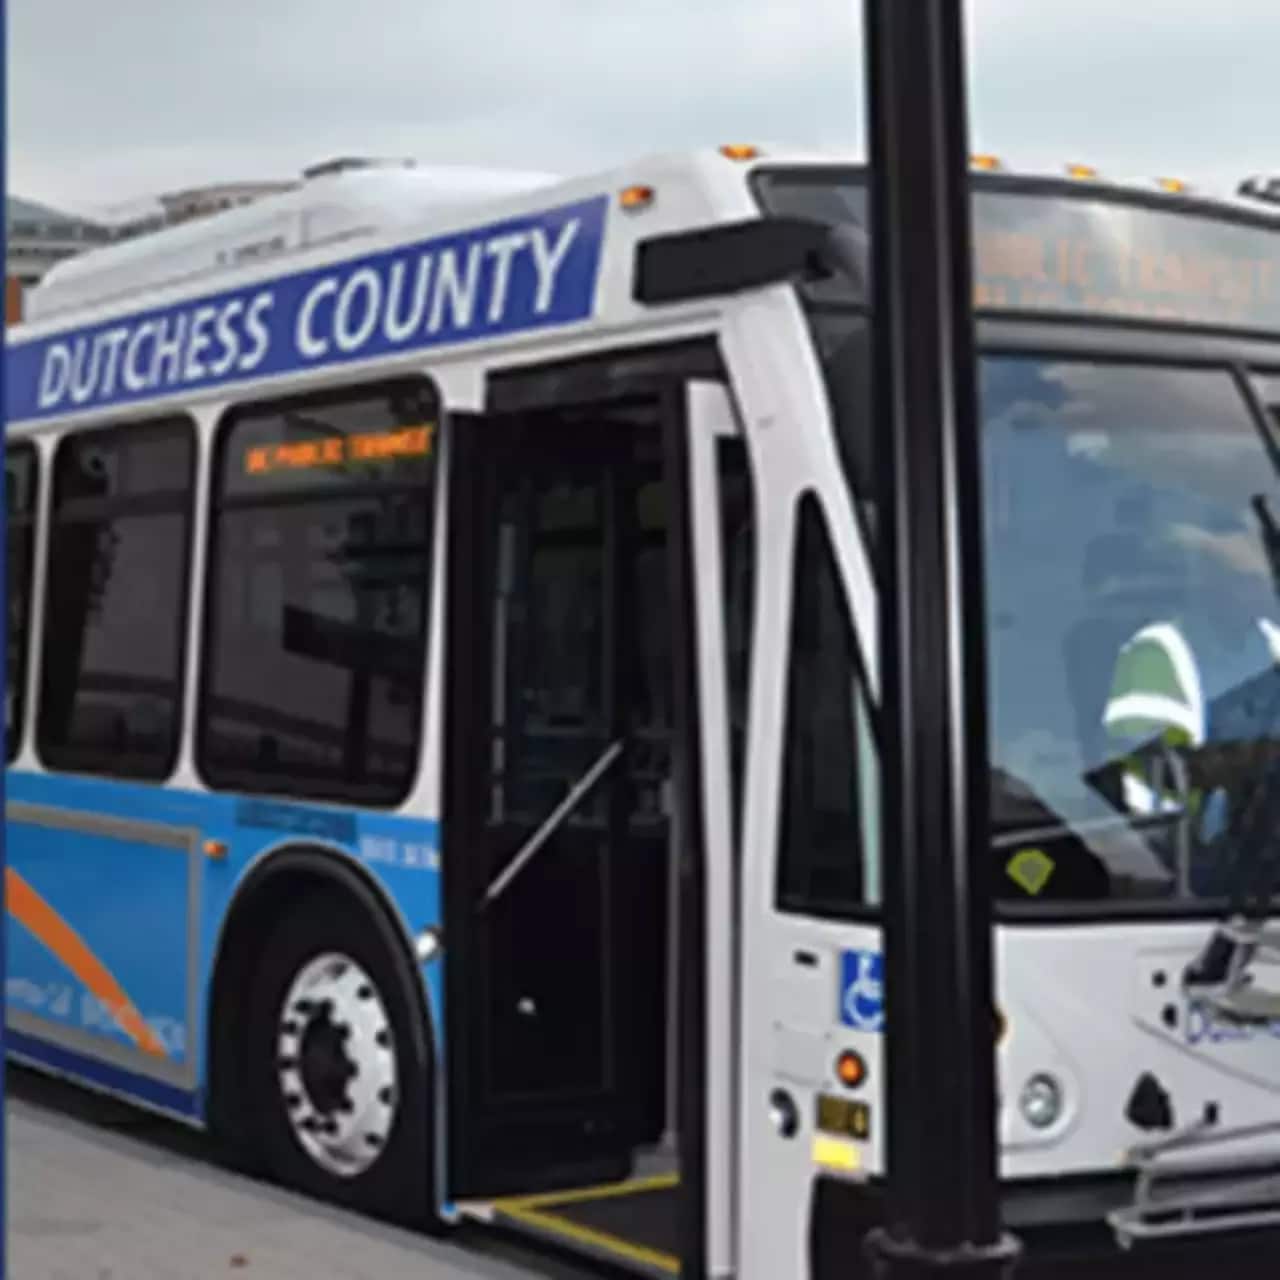 Poughkeepsie is hoping to stop the county's takeover of its bus system.